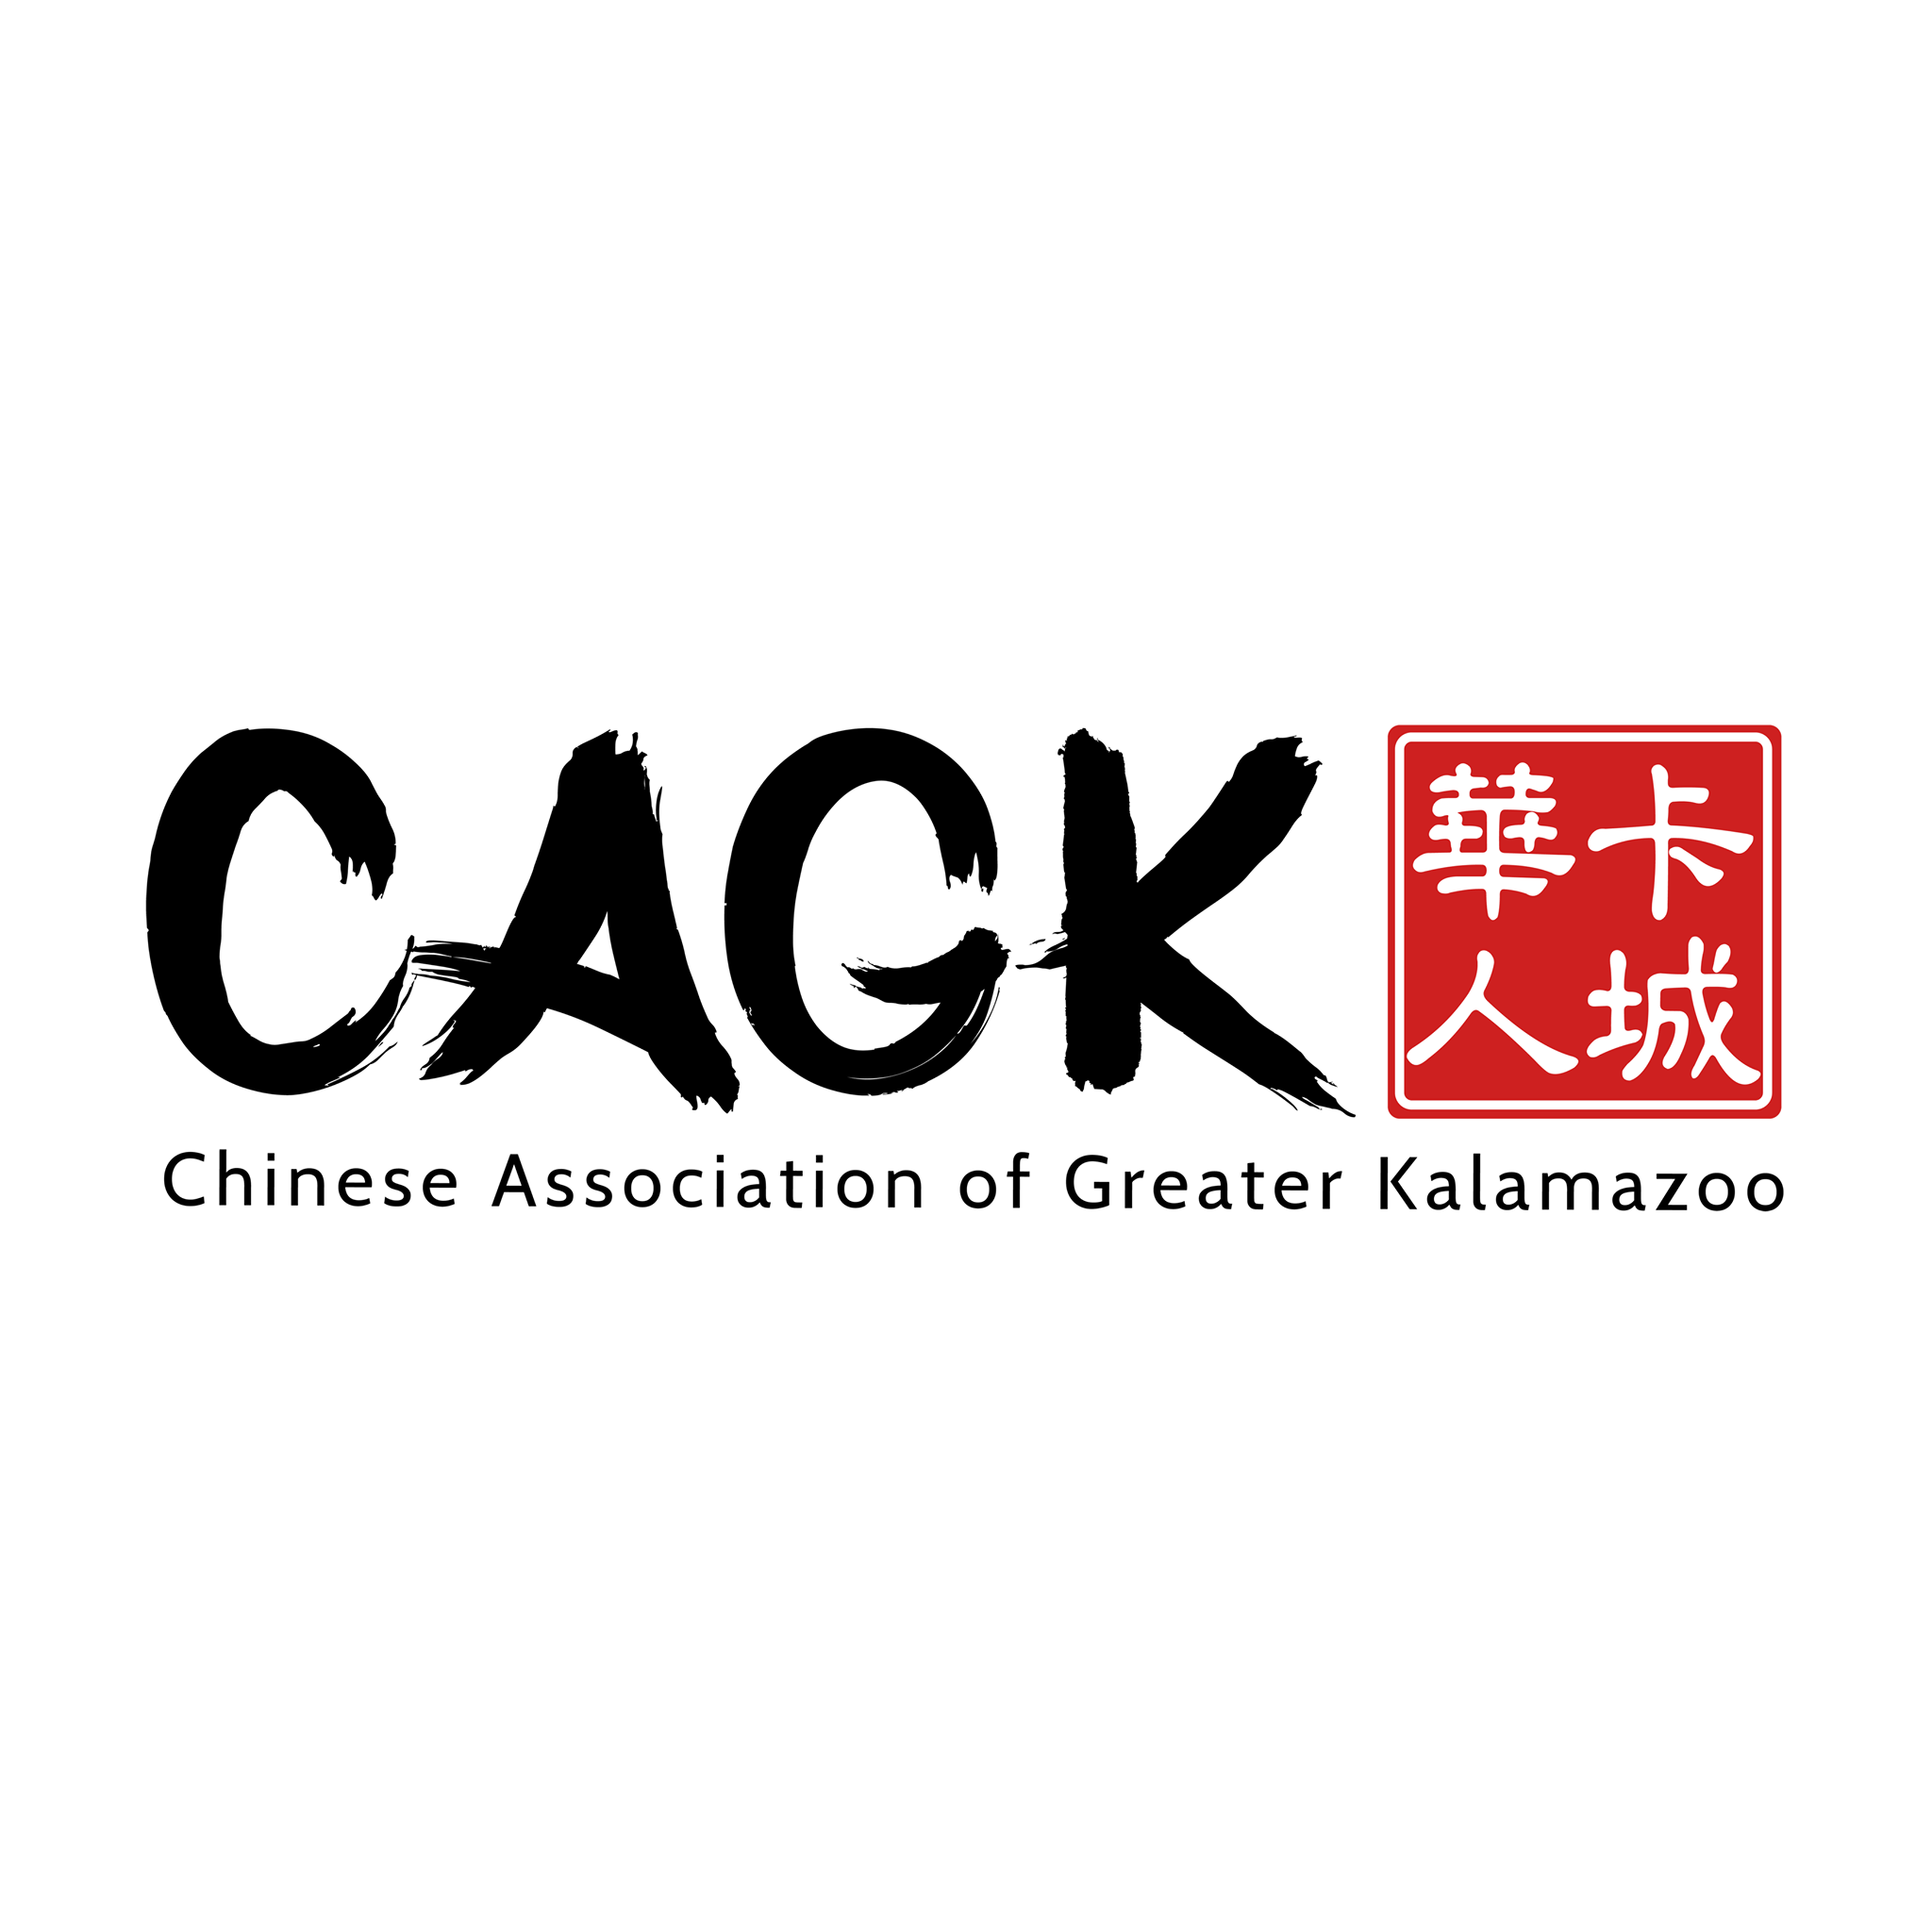 Chinese Cultural Organizations in USA - Chinese Association of Greater Kalamazoo